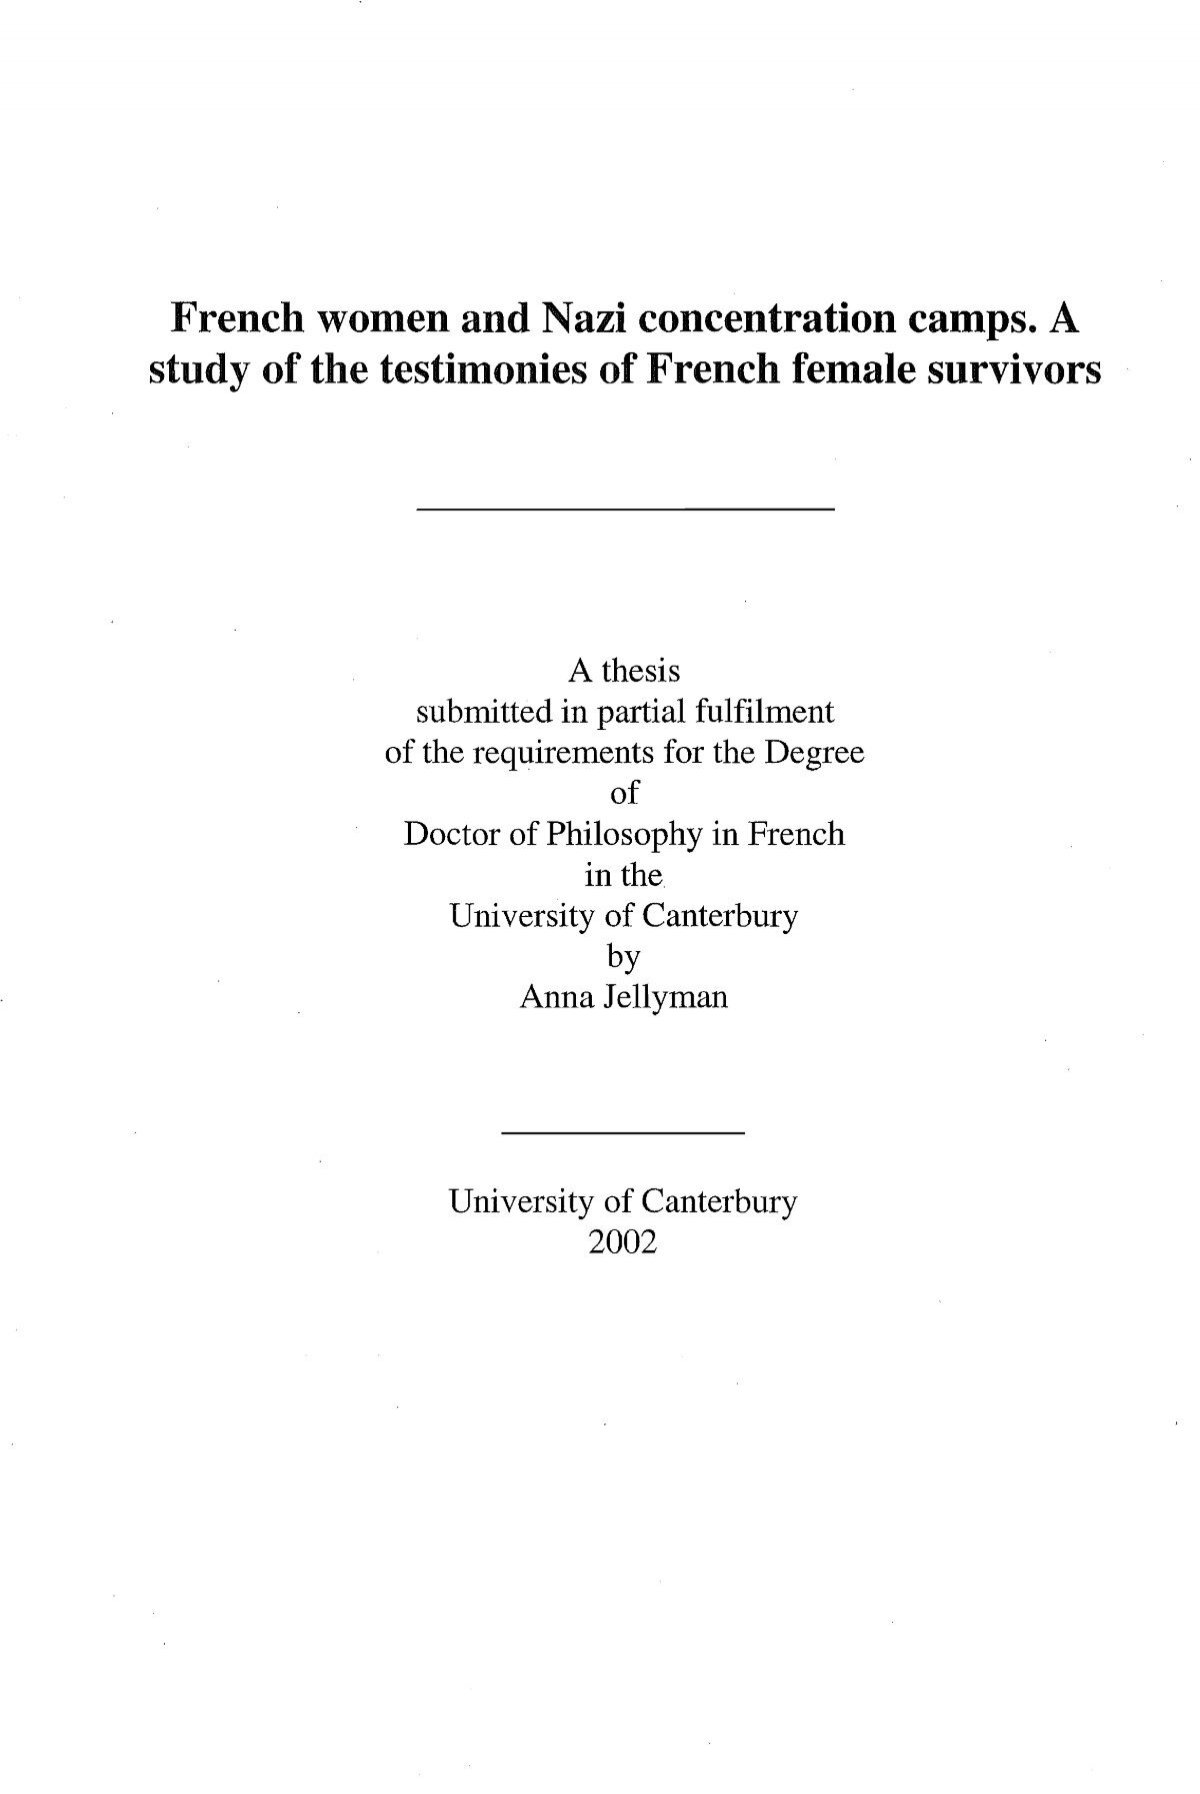 French Women And Nazi Concentration Camps University Of